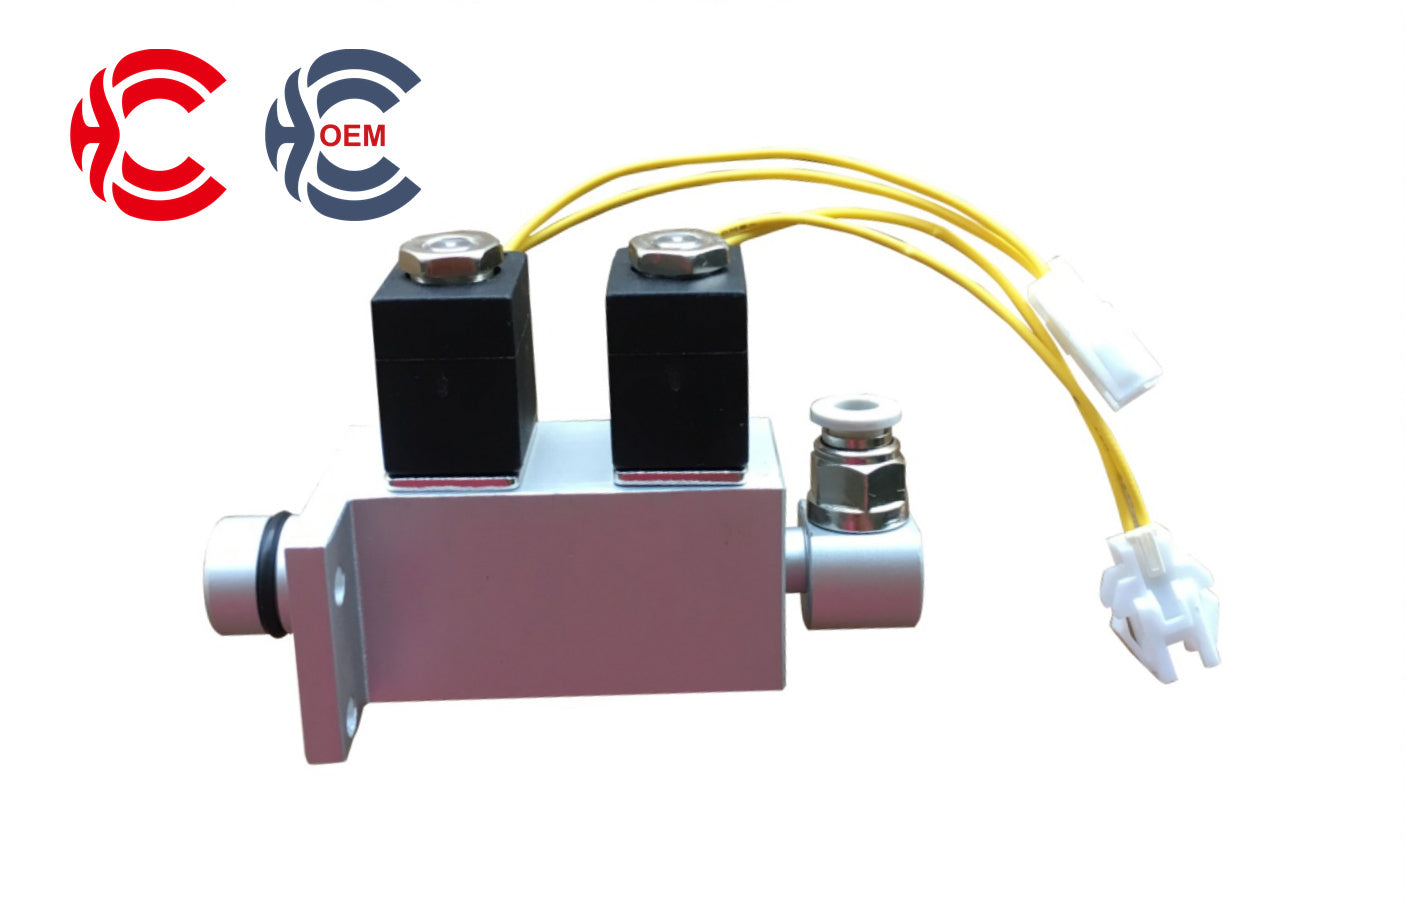 OEM: KAILONG Double-way Adblue/Urea Pump Repair Accessories Gas Solenoid ValveMaterial: MetalColor: SilverOrigin: Made in ChinaWeight: 50gPacking List: 1* Adblue/Urea Pump Repair Accessories Gas Solenoid Valve More ServiceWe can provide OEM Manufacturing serviceWe can Be your one-step solution for Auto PartsWe can provide technical scheme for you Feel Free to Contact Us, We will get back to you as soon as possible.